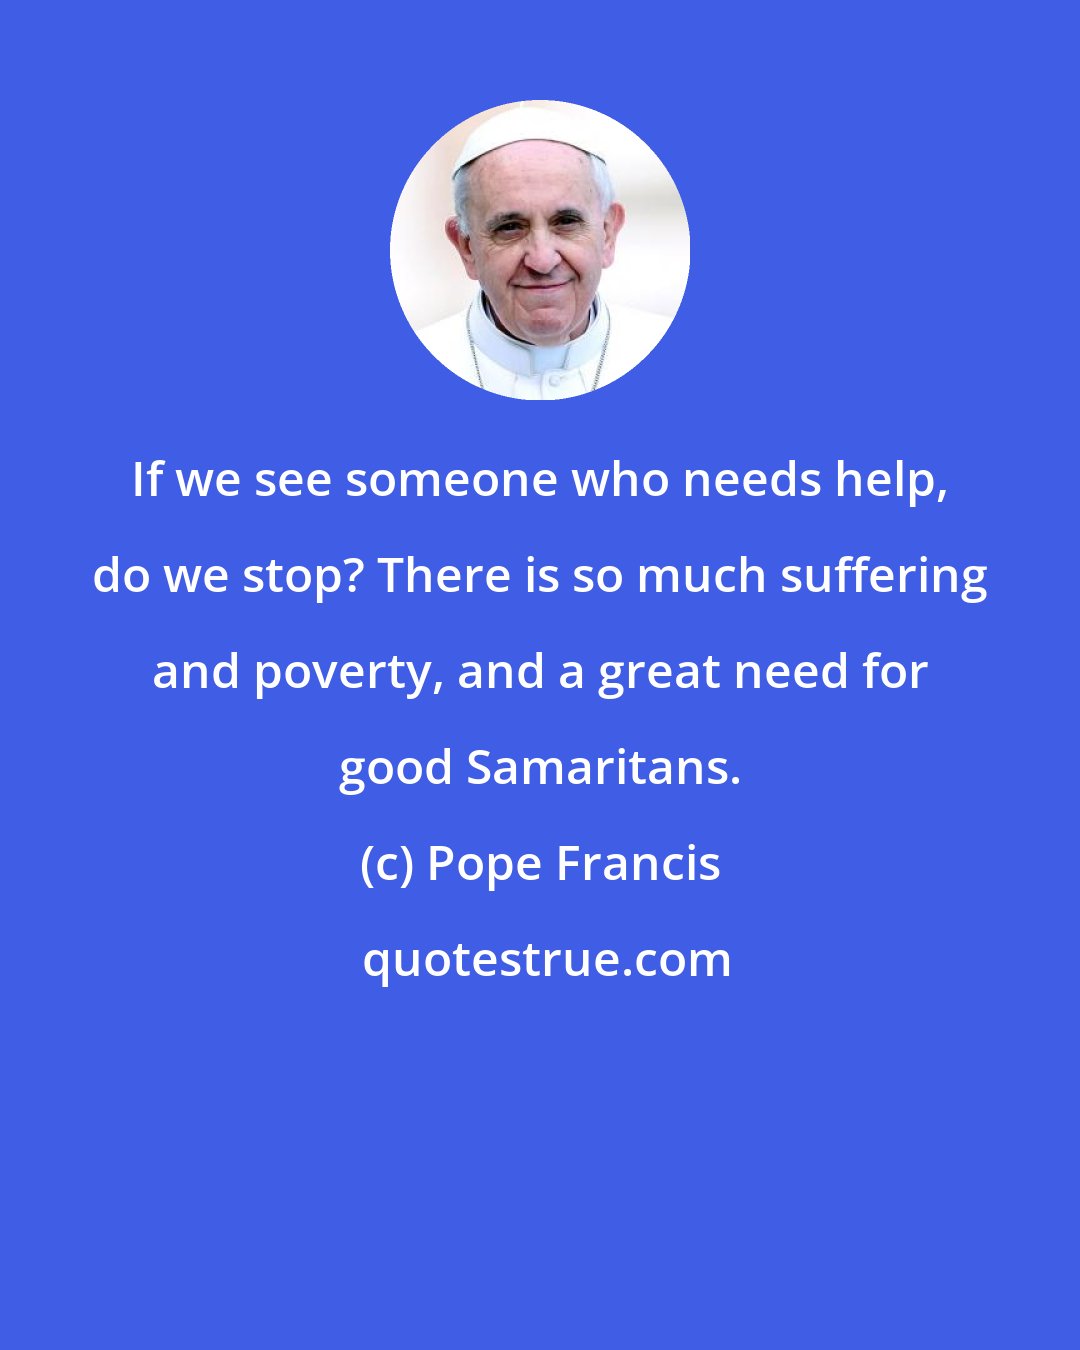 Pope Francis: If we see someone who needs help, do we stop? There is so much suffering and poverty, and a great need for good Samaritans.